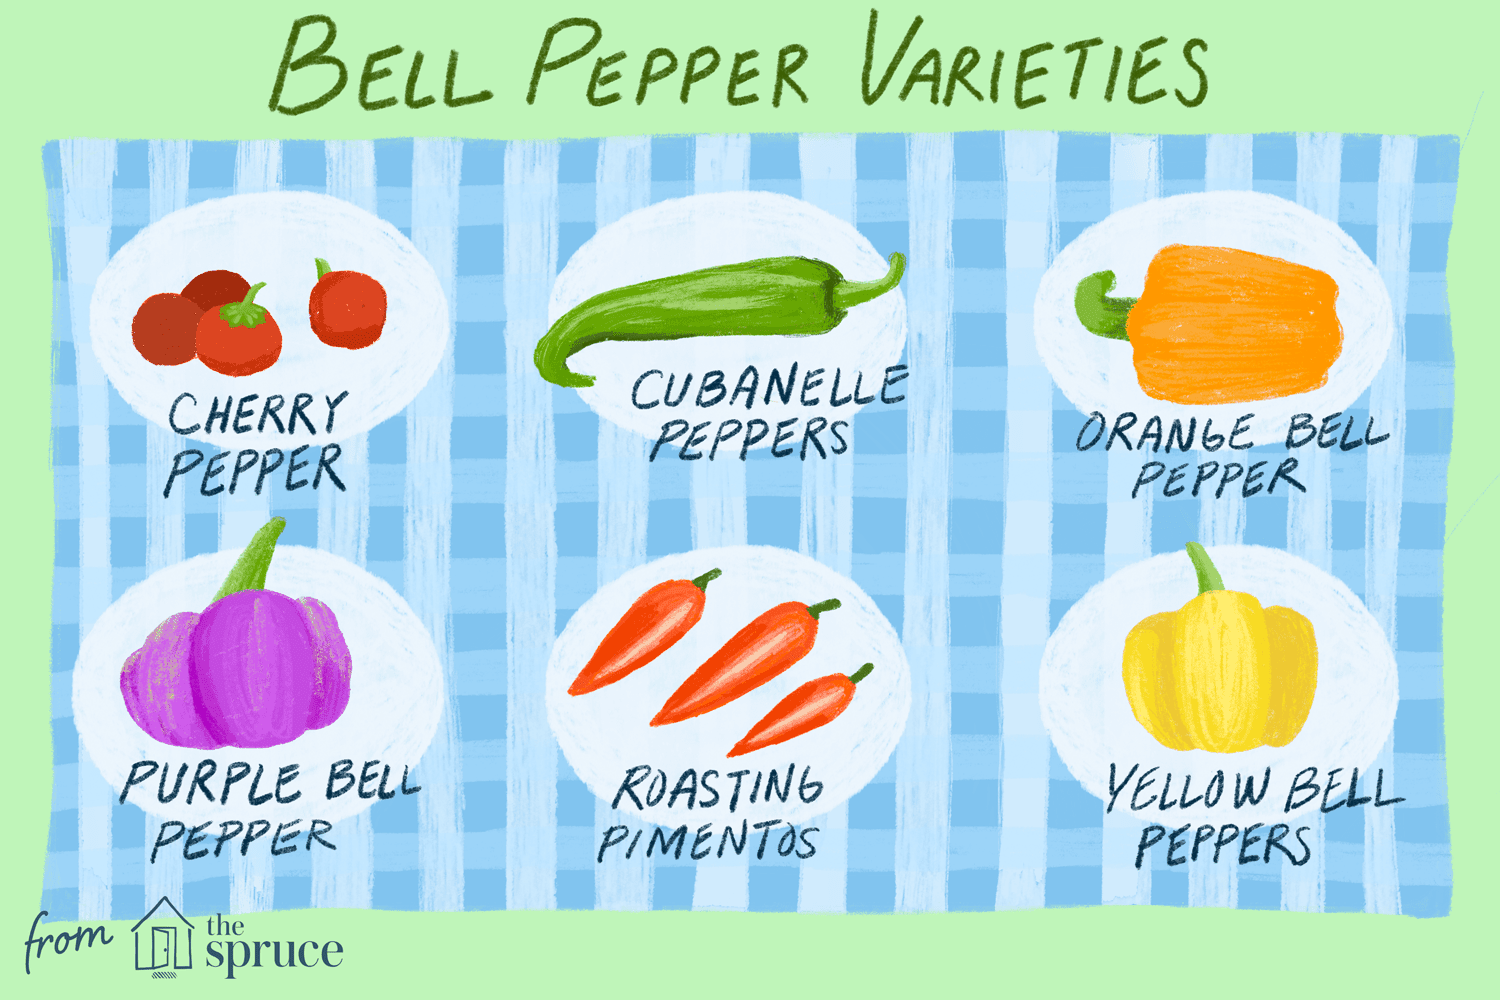 The Health Encapsulated in Bell Peppers: Nutrients and Benefits Differ by Color